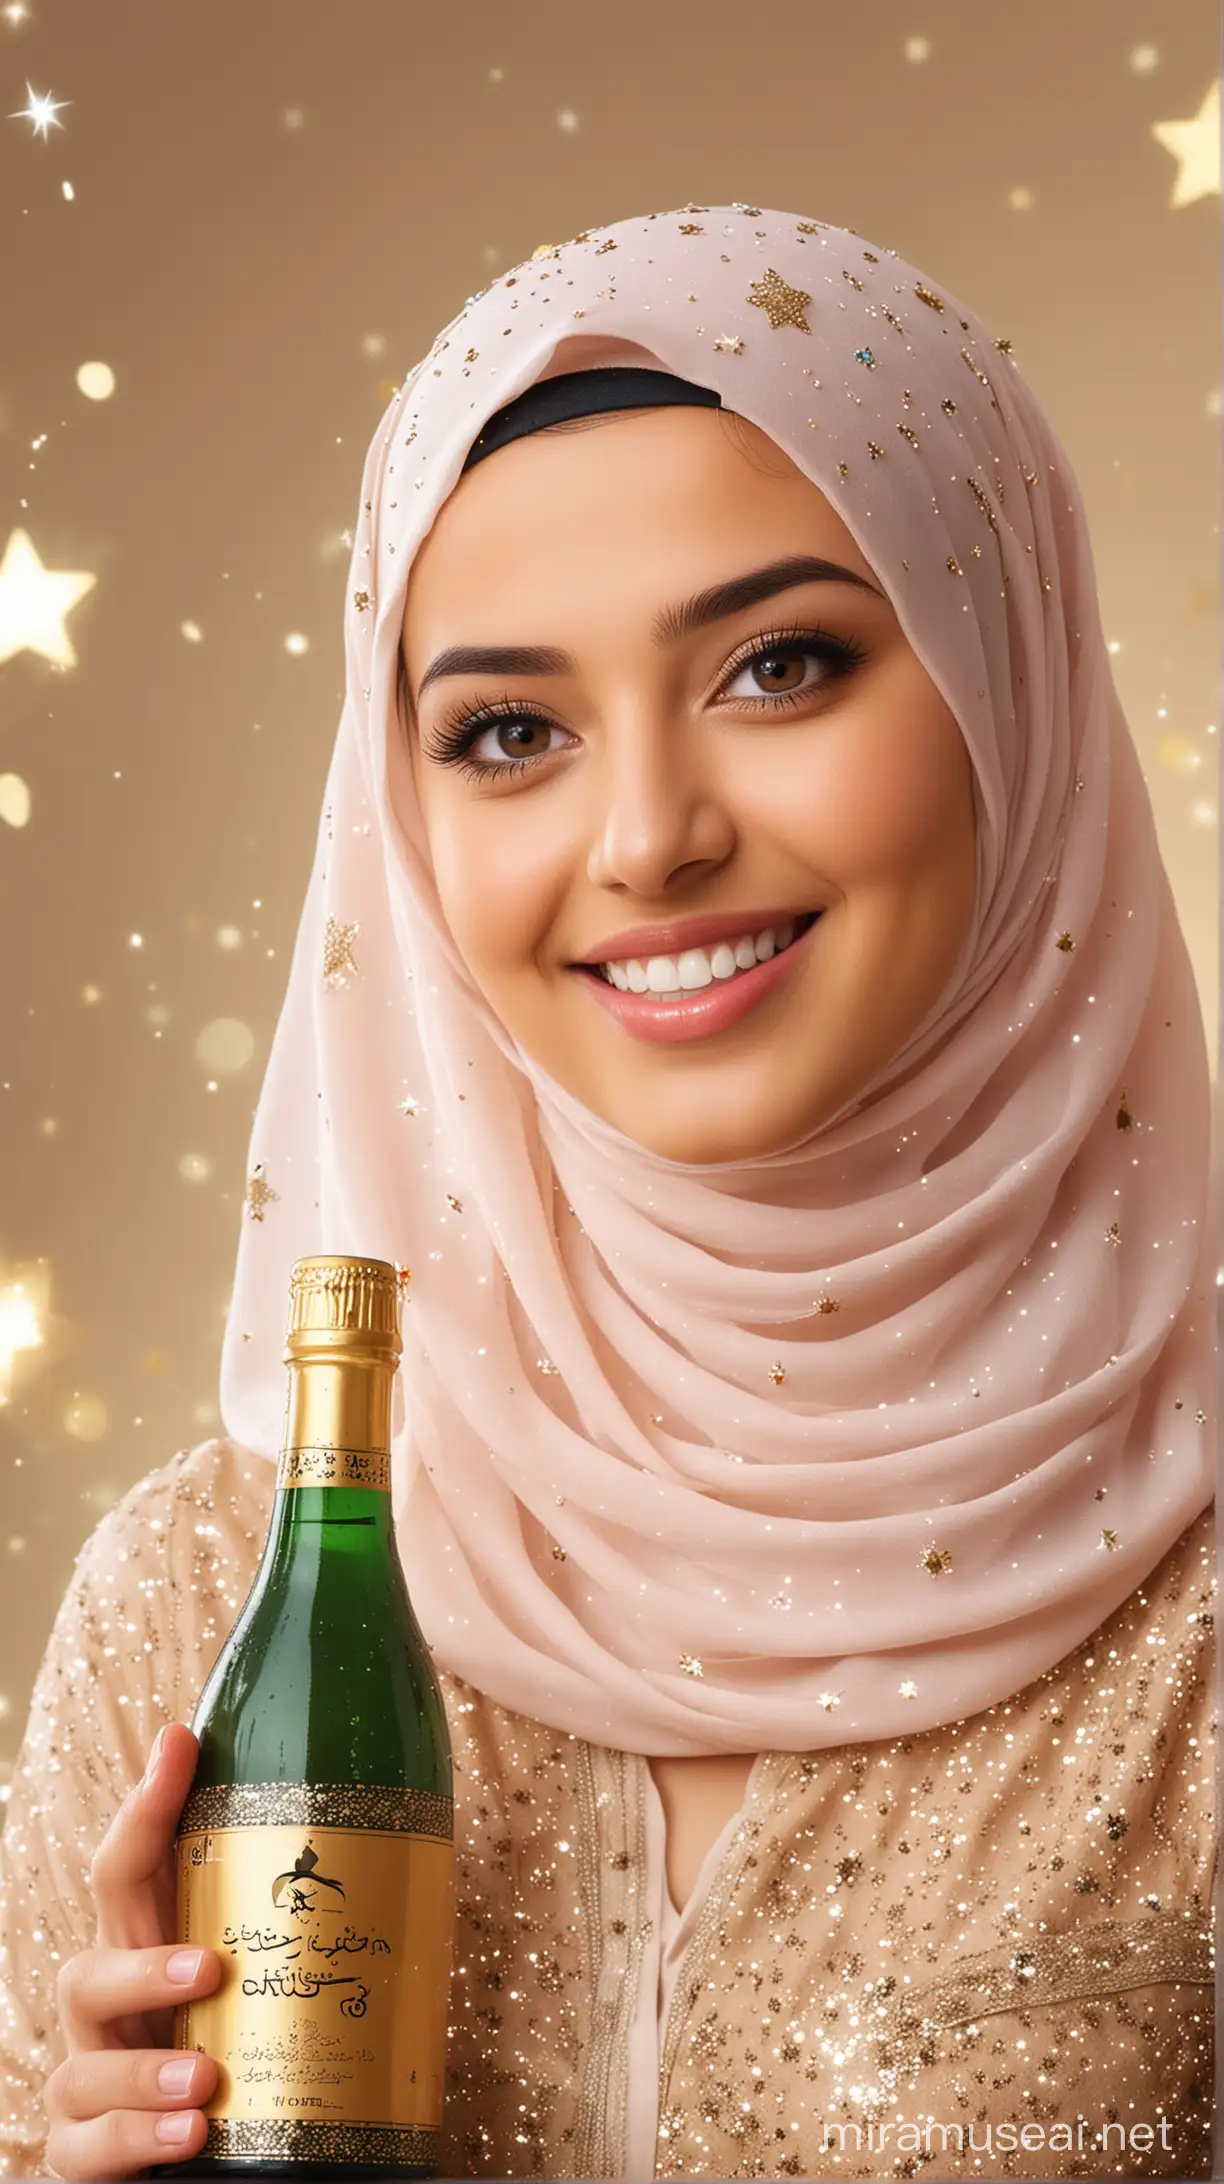 24 year old beautiful muslim girl wearing hijab with cute smile,white skin with eid festival background, with one bottle on hand, mid photo up to belley,graphics eid festival bg, glossy golden back ground with sparkles, and stars, right aranged photo,boobs size 38, right aranged, wide frame, big boobs size 38,good shape